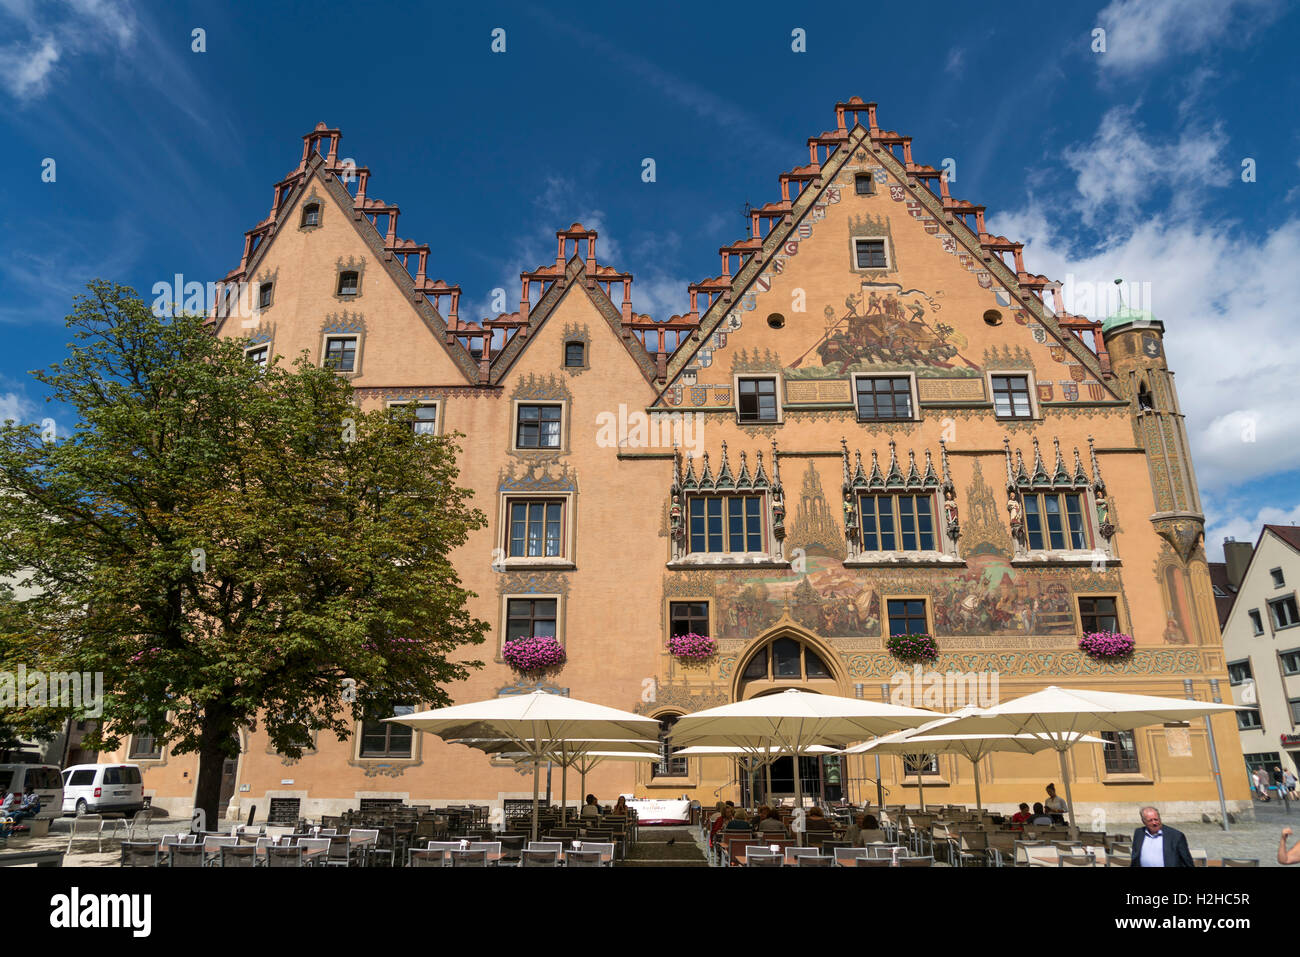 Town hall in Ulm, Baden-Württemberg, Germany, Europe Stock Photo